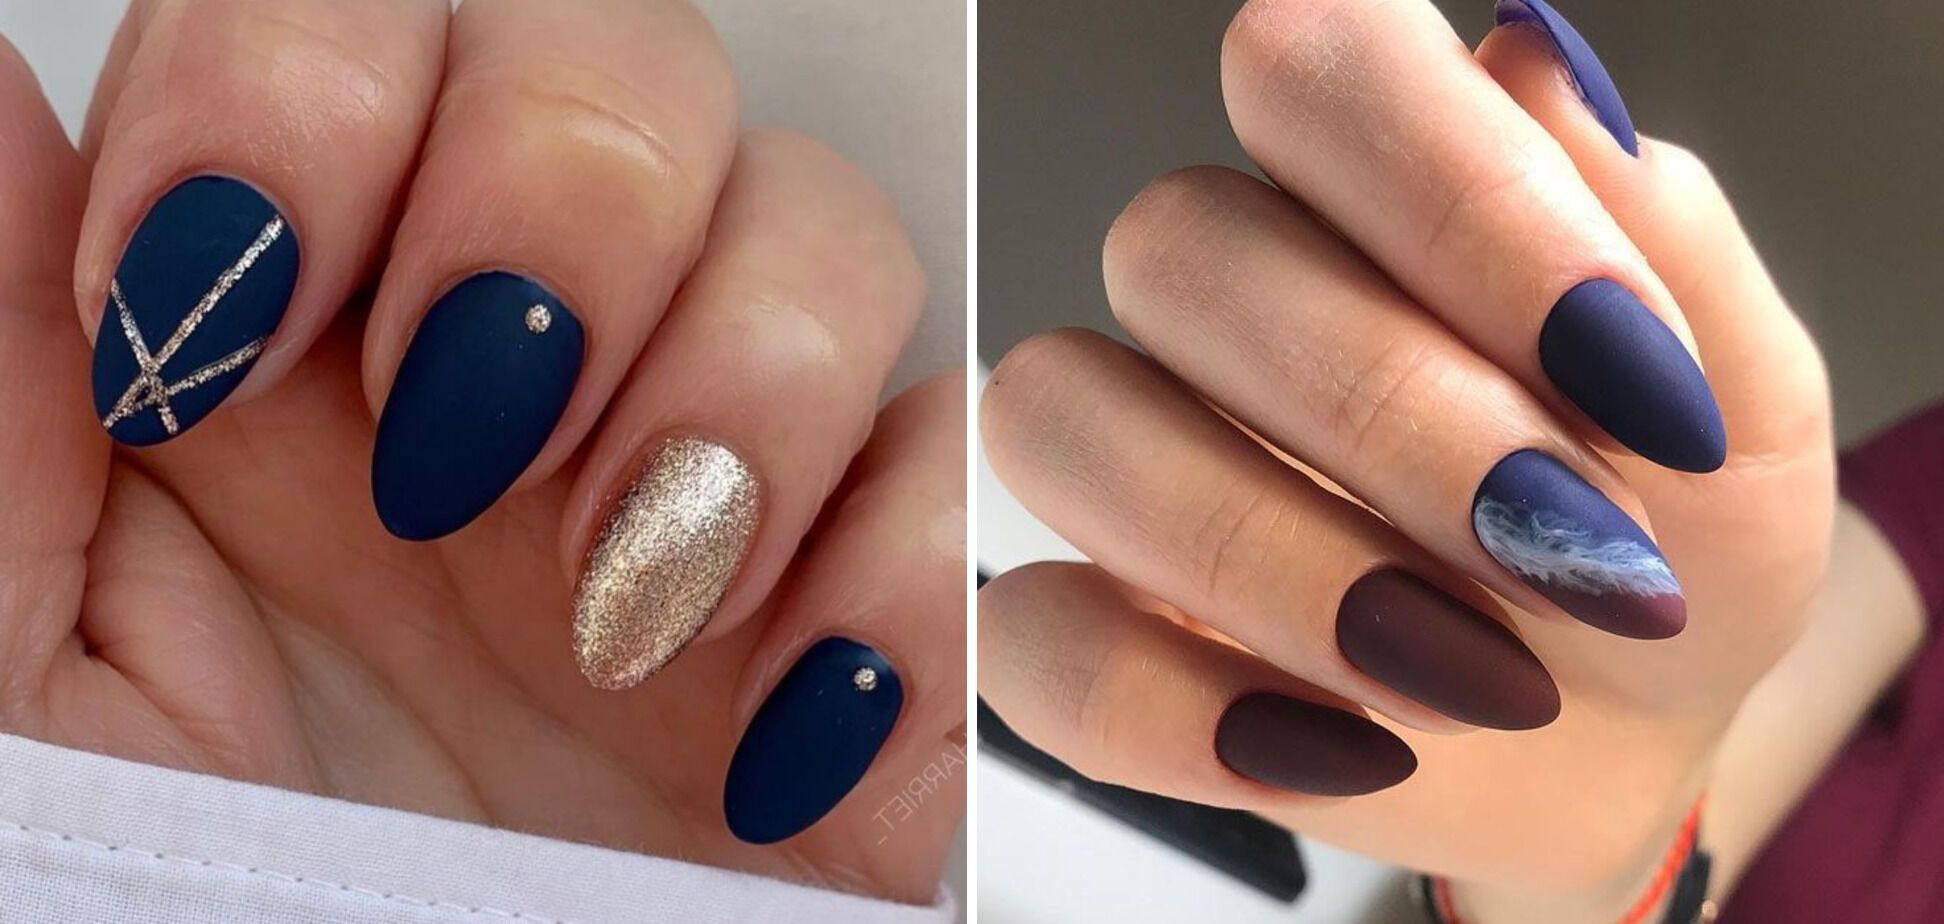 The perfect manicure for Christmas has been named: this color is considered an anti-trend, but it comes back into fashion every year